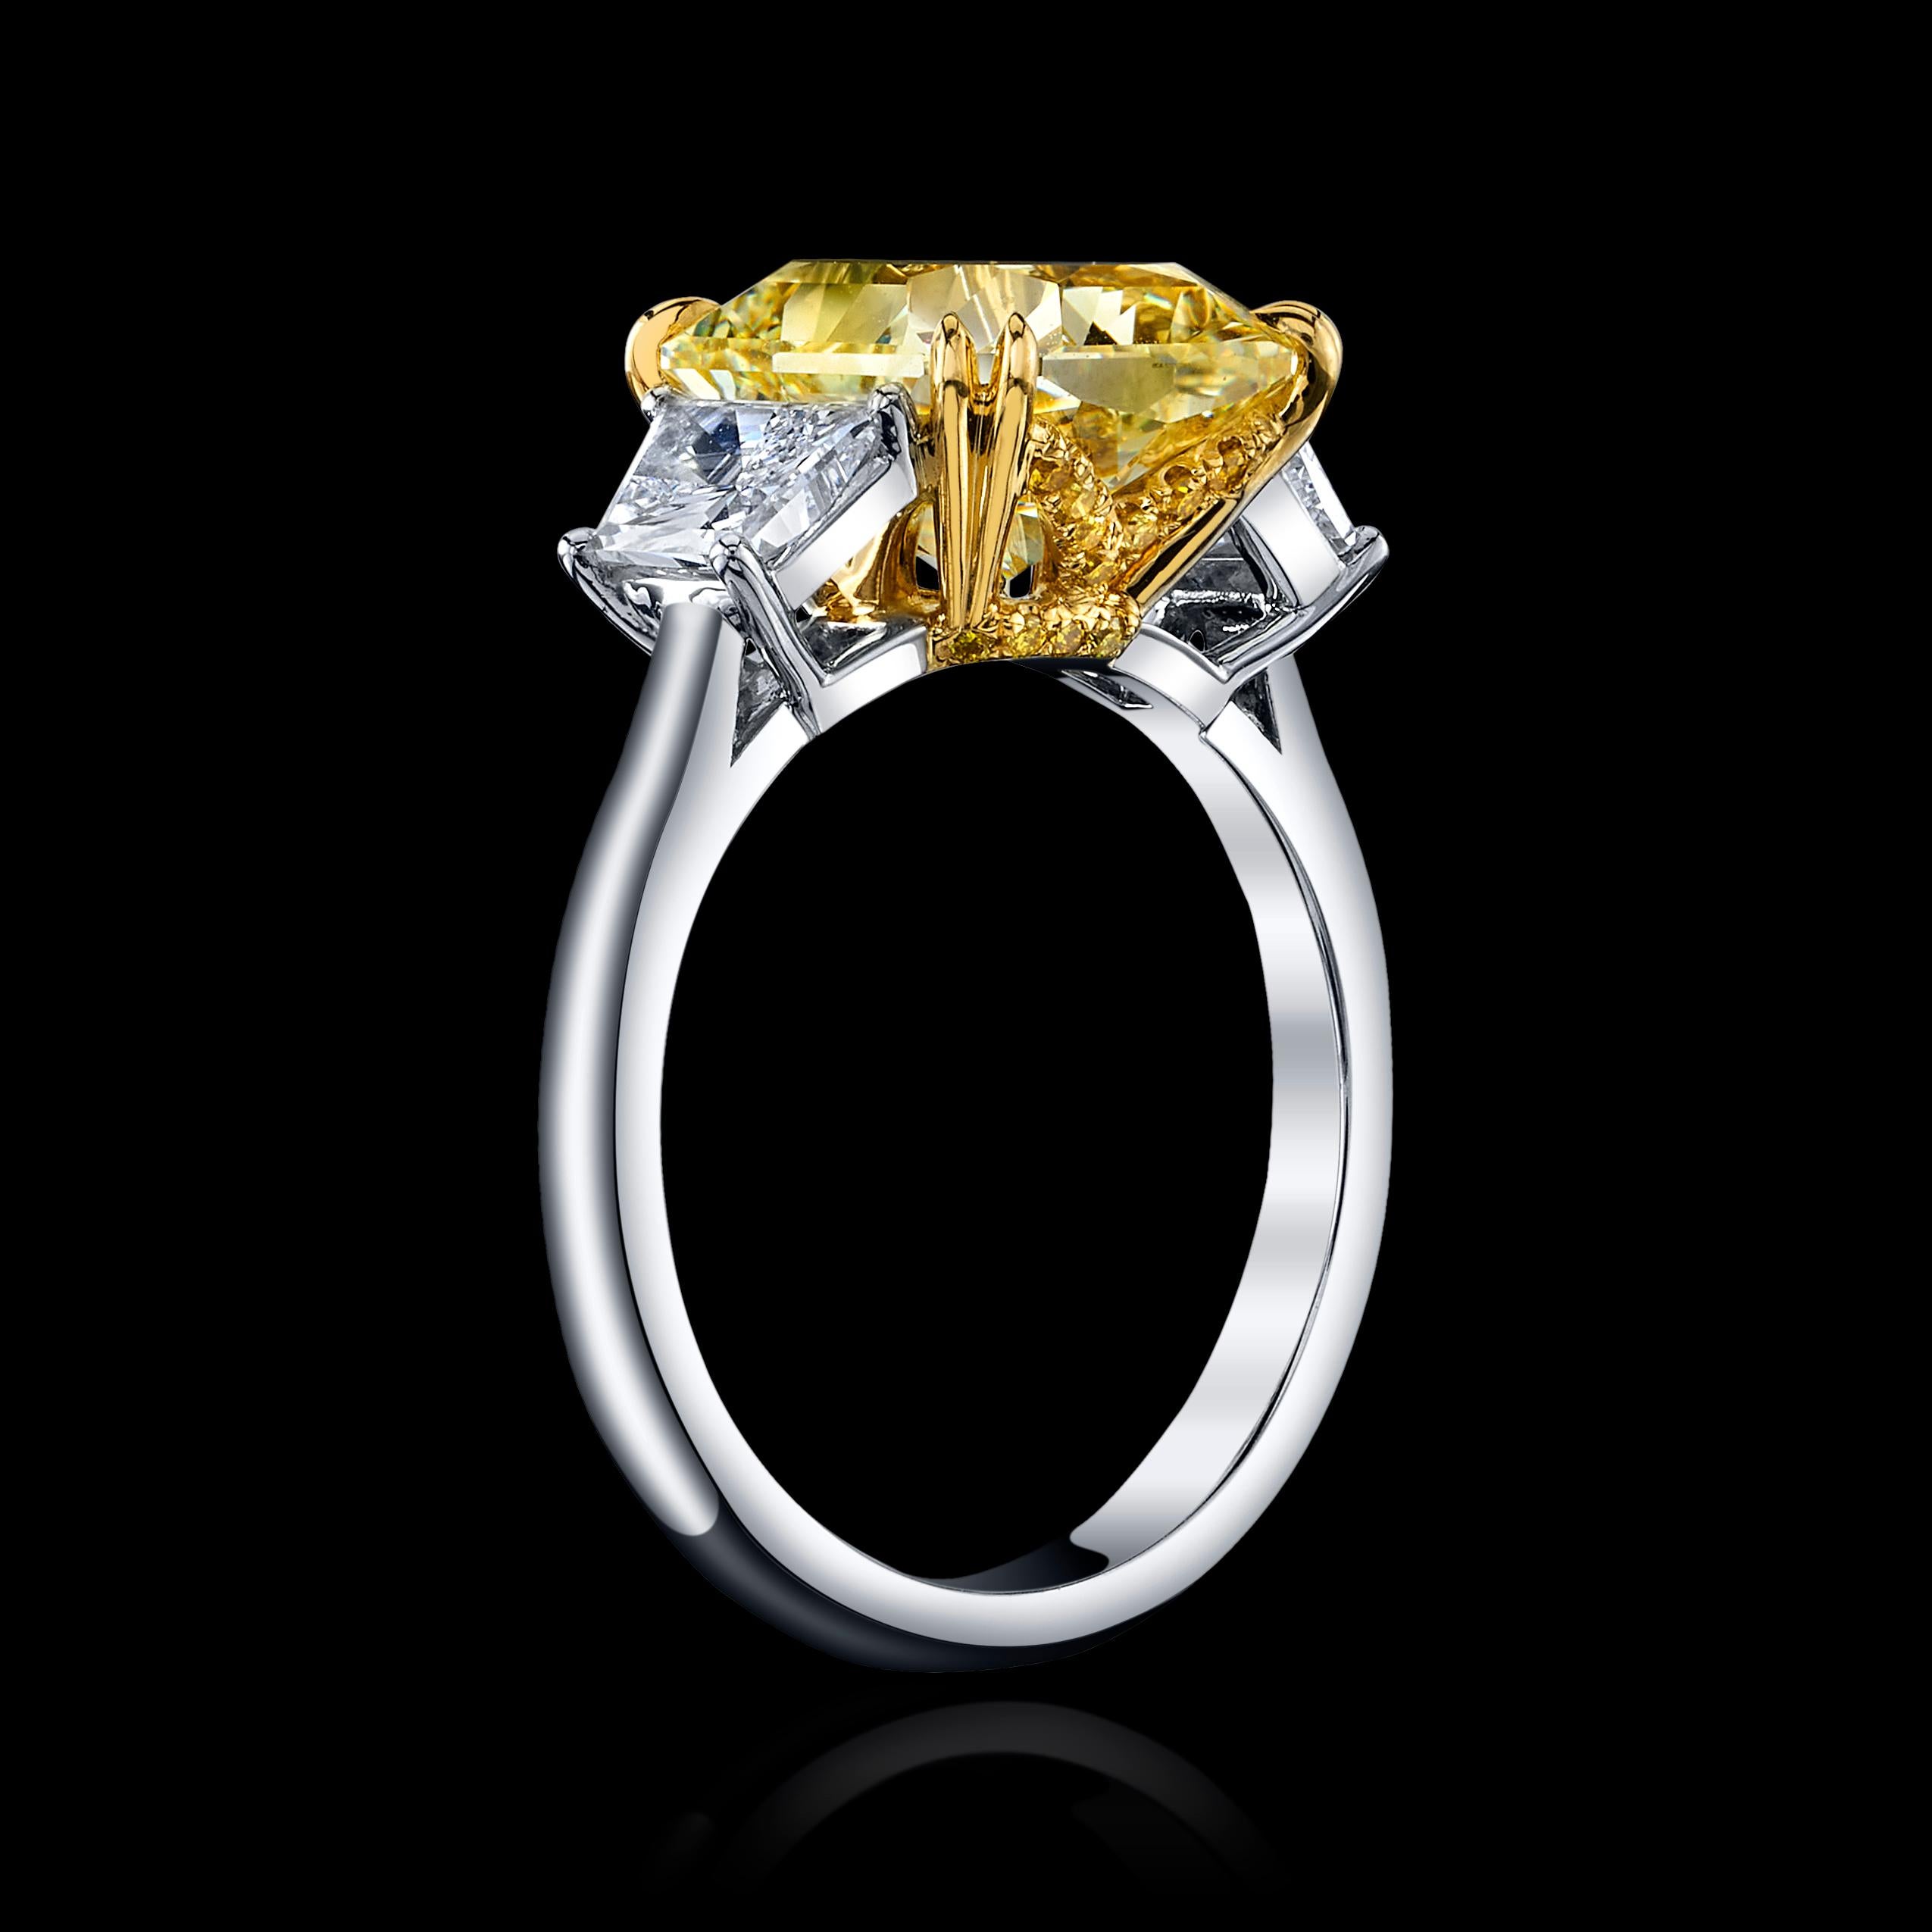 LARGE AND CLASSIC RADIANT 5.10CT FANCY YELLOW DIAMOND, IF

5.10ct RAD FY, IF, 

GIA #5212807103 

set in Platinum + 0.42 Trapezoids D color, VVS1 clarity, GIA# 5386705926 

and + 0.39ct Trapezoid D color, VS1 clarity GIA #2386298305 

PLUS 0.11cttw